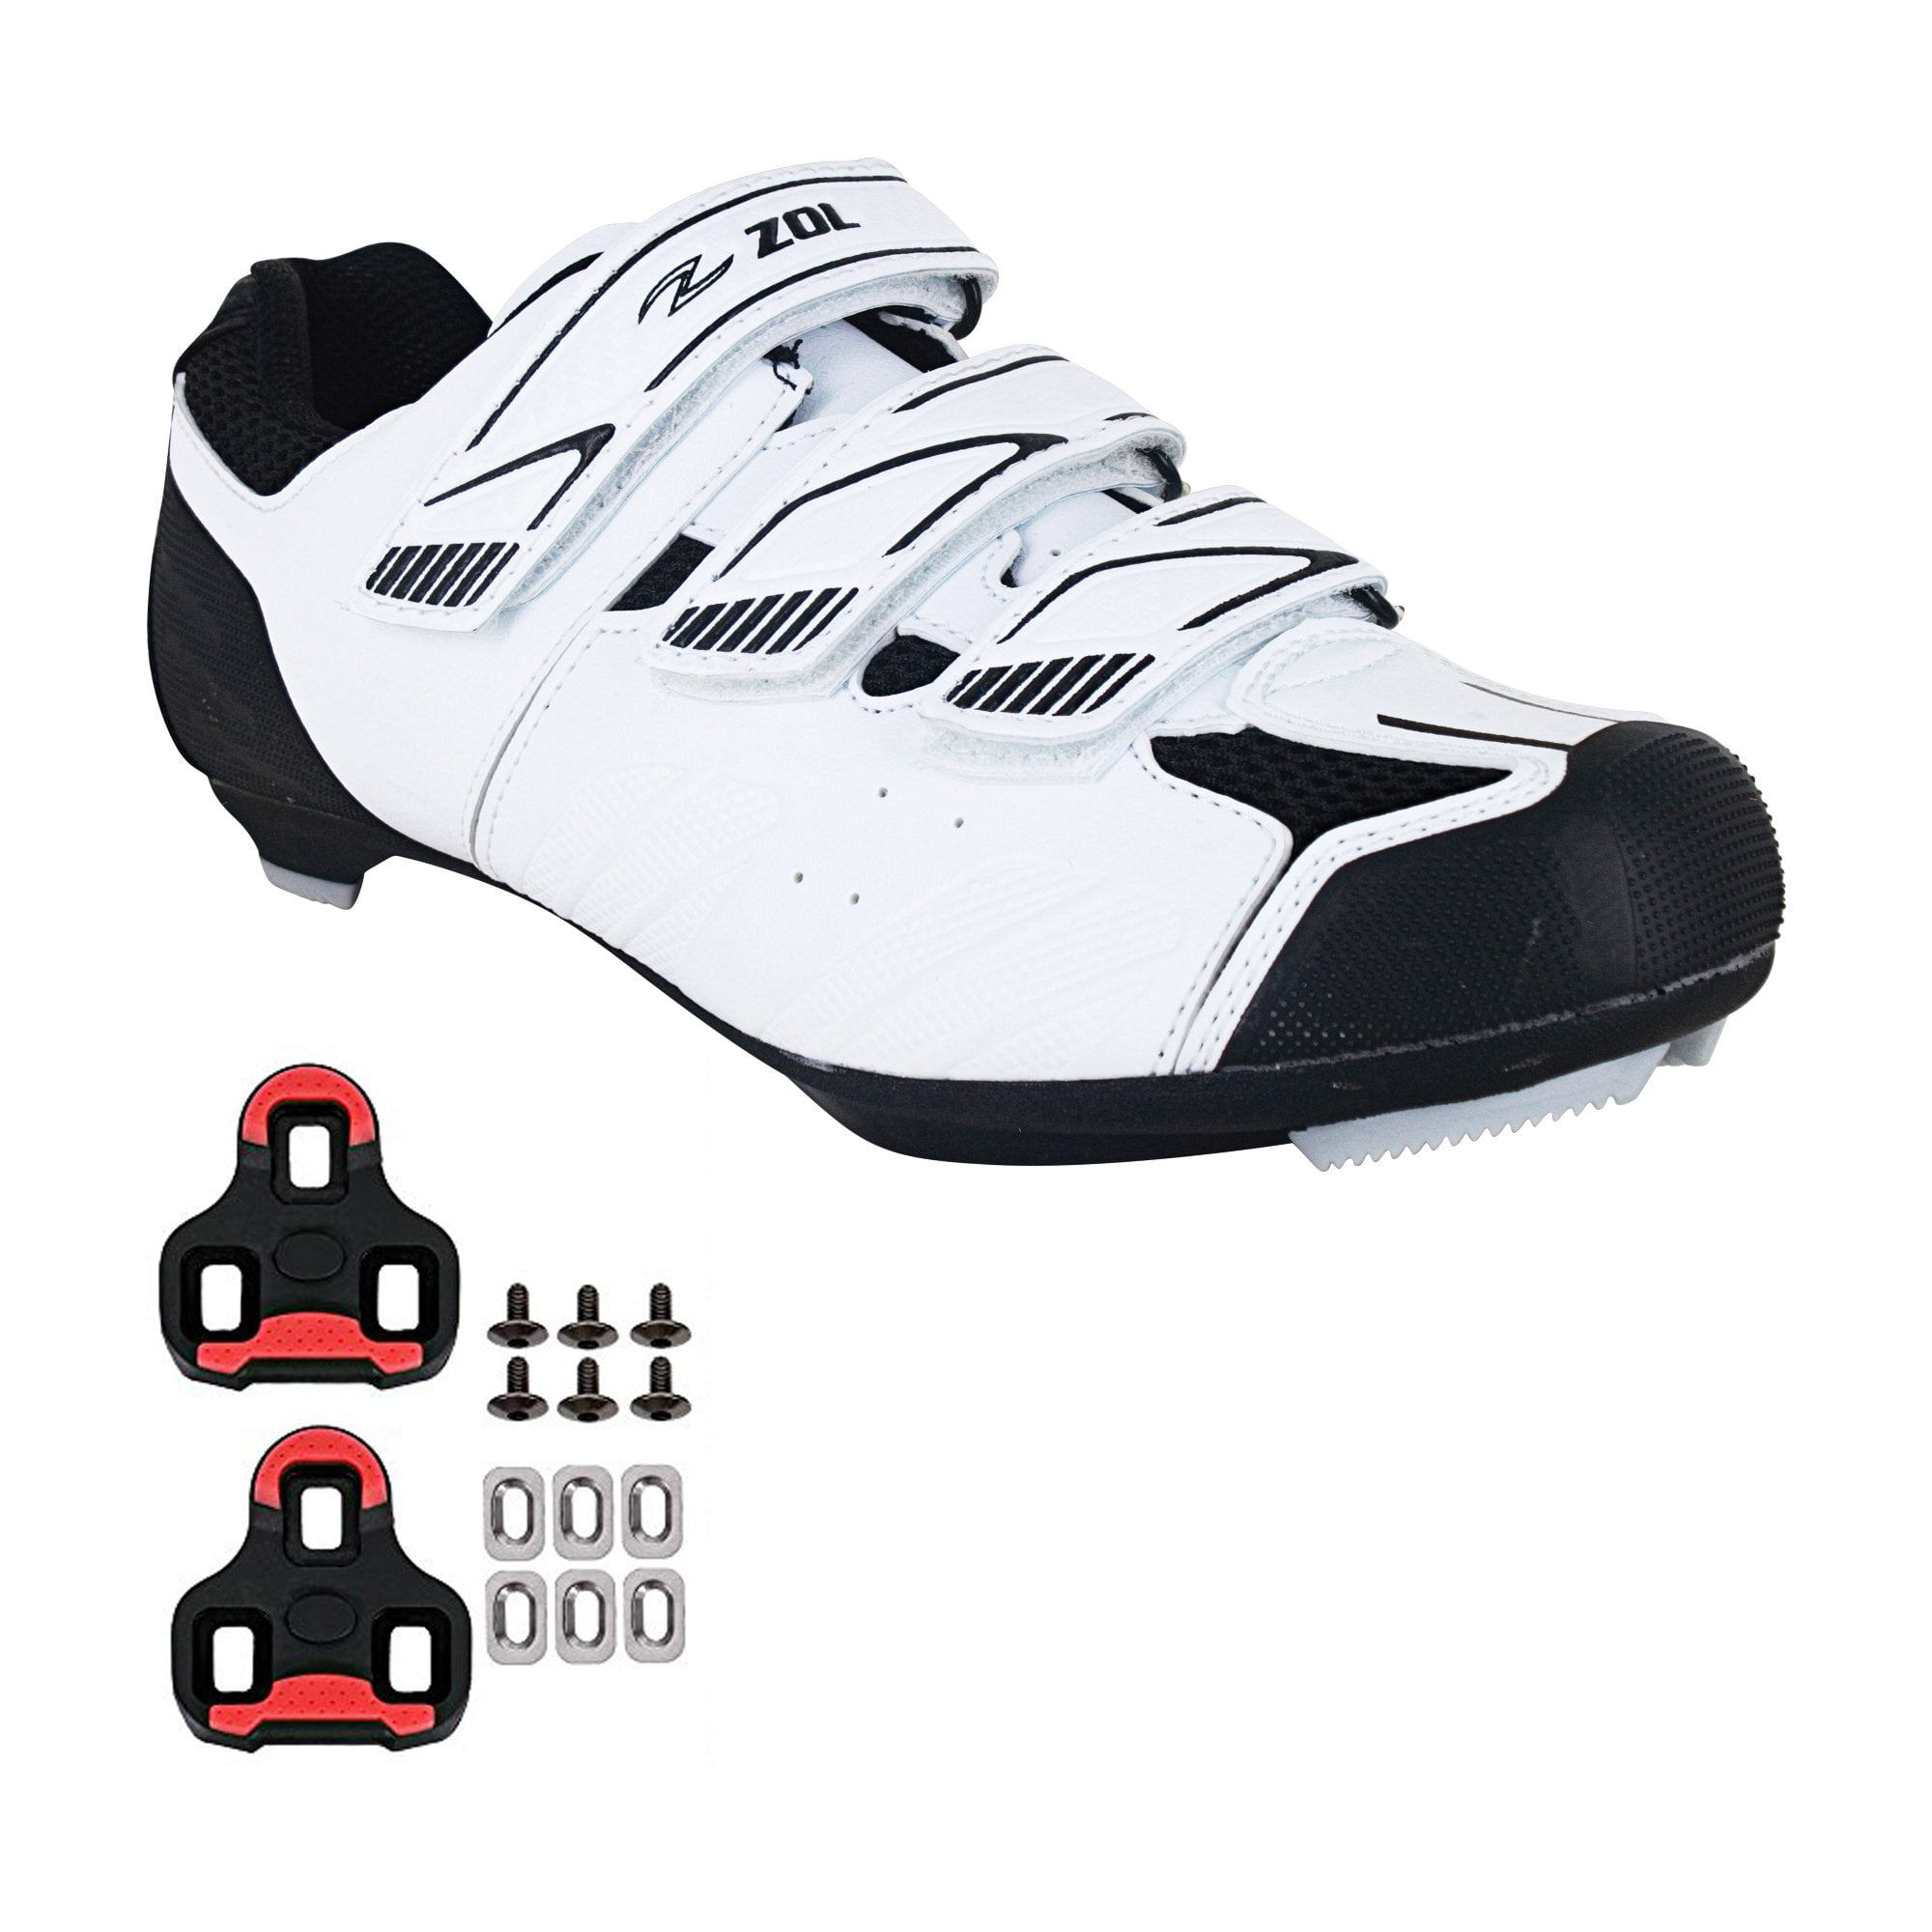 Zol Stage Road Cycling Shoes with Look 